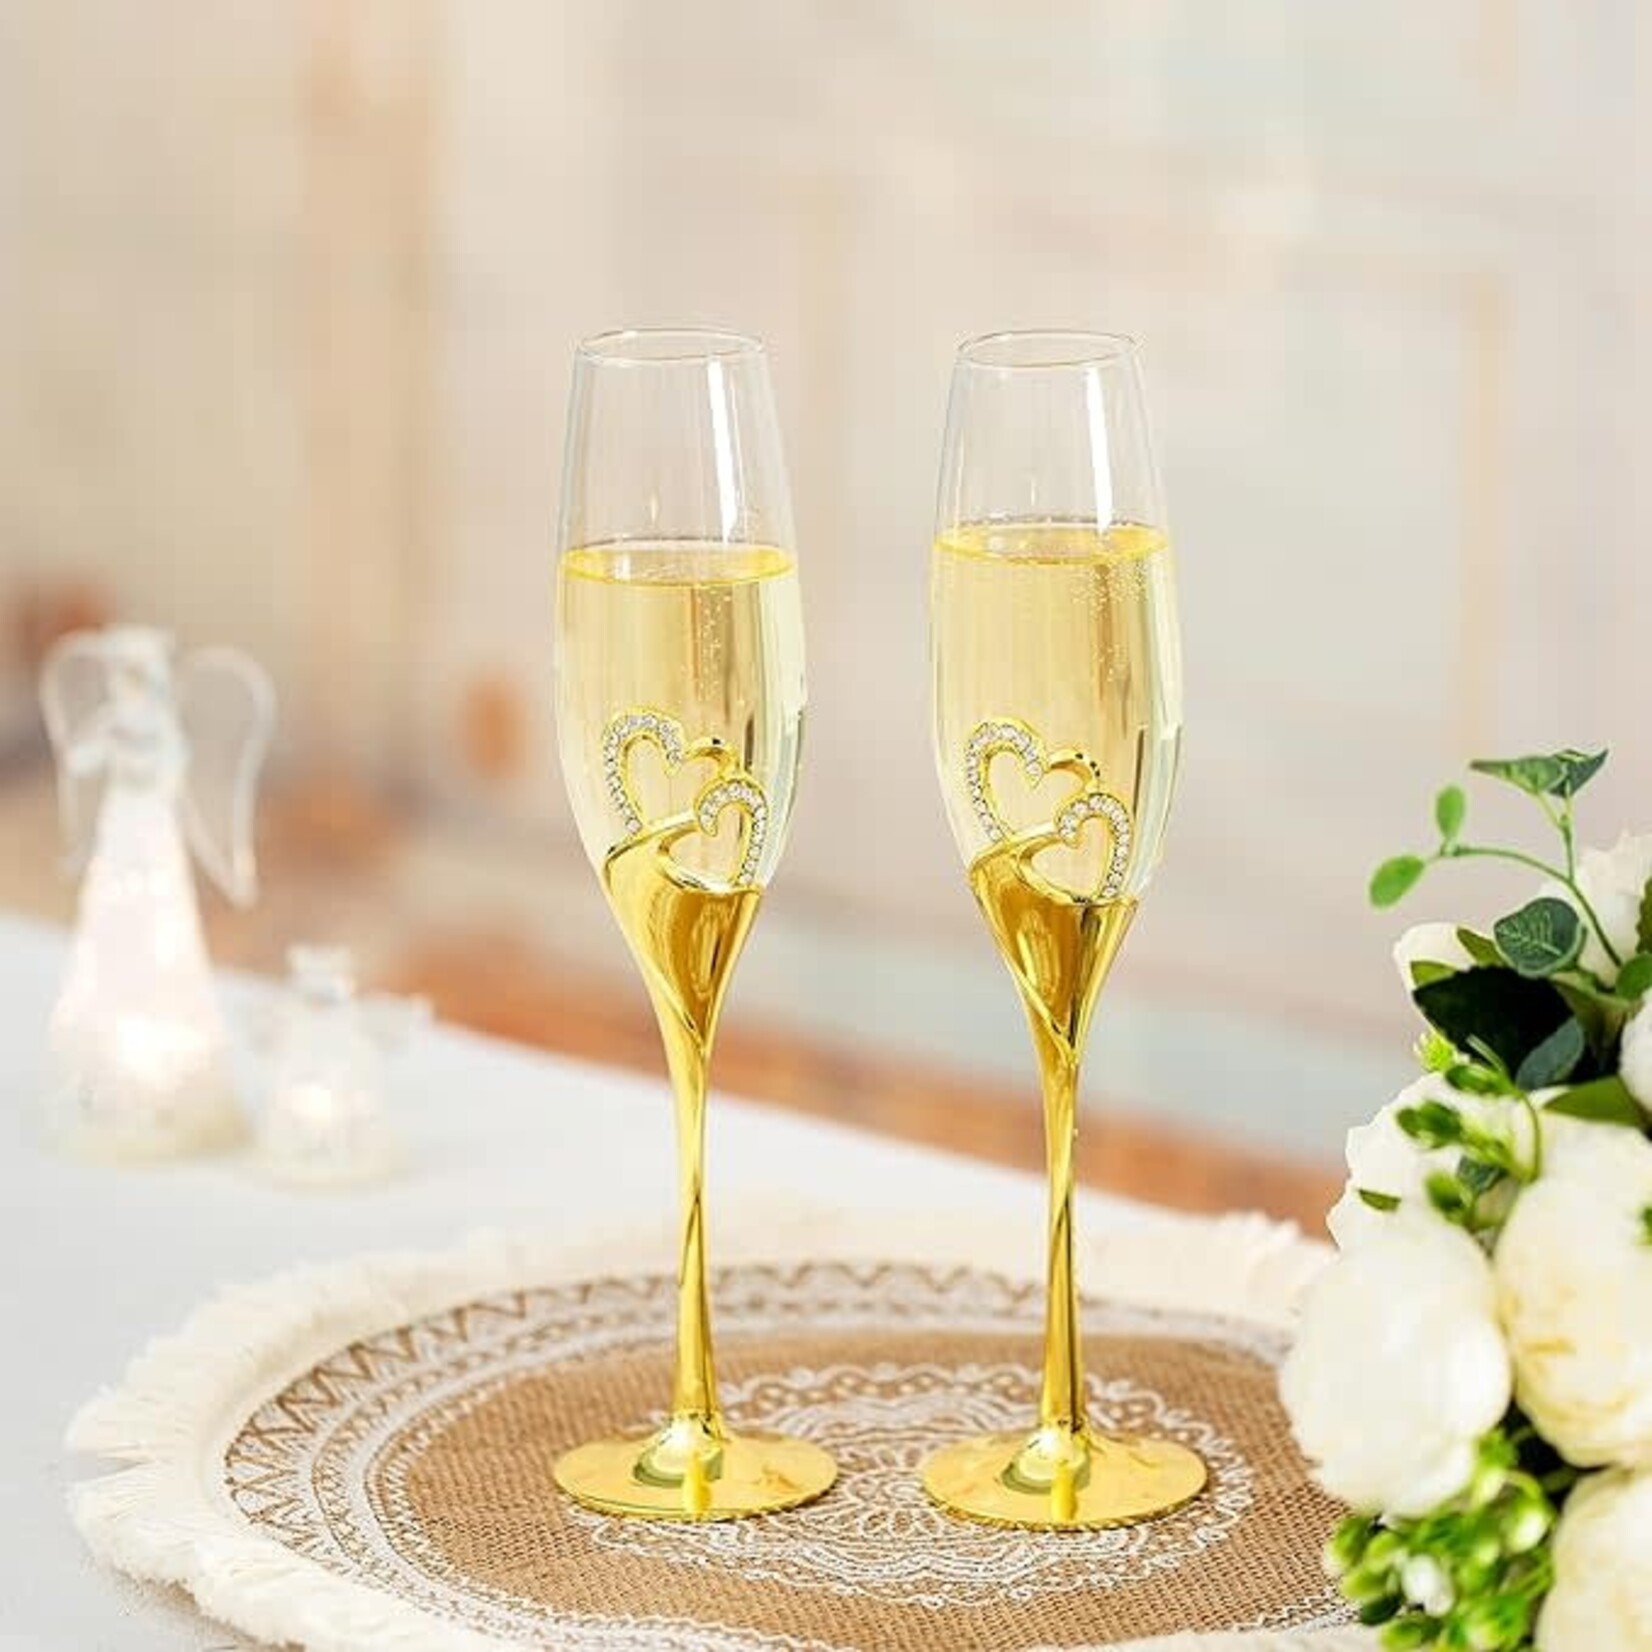 Gold-Toned Champagne Flutes with Crystals